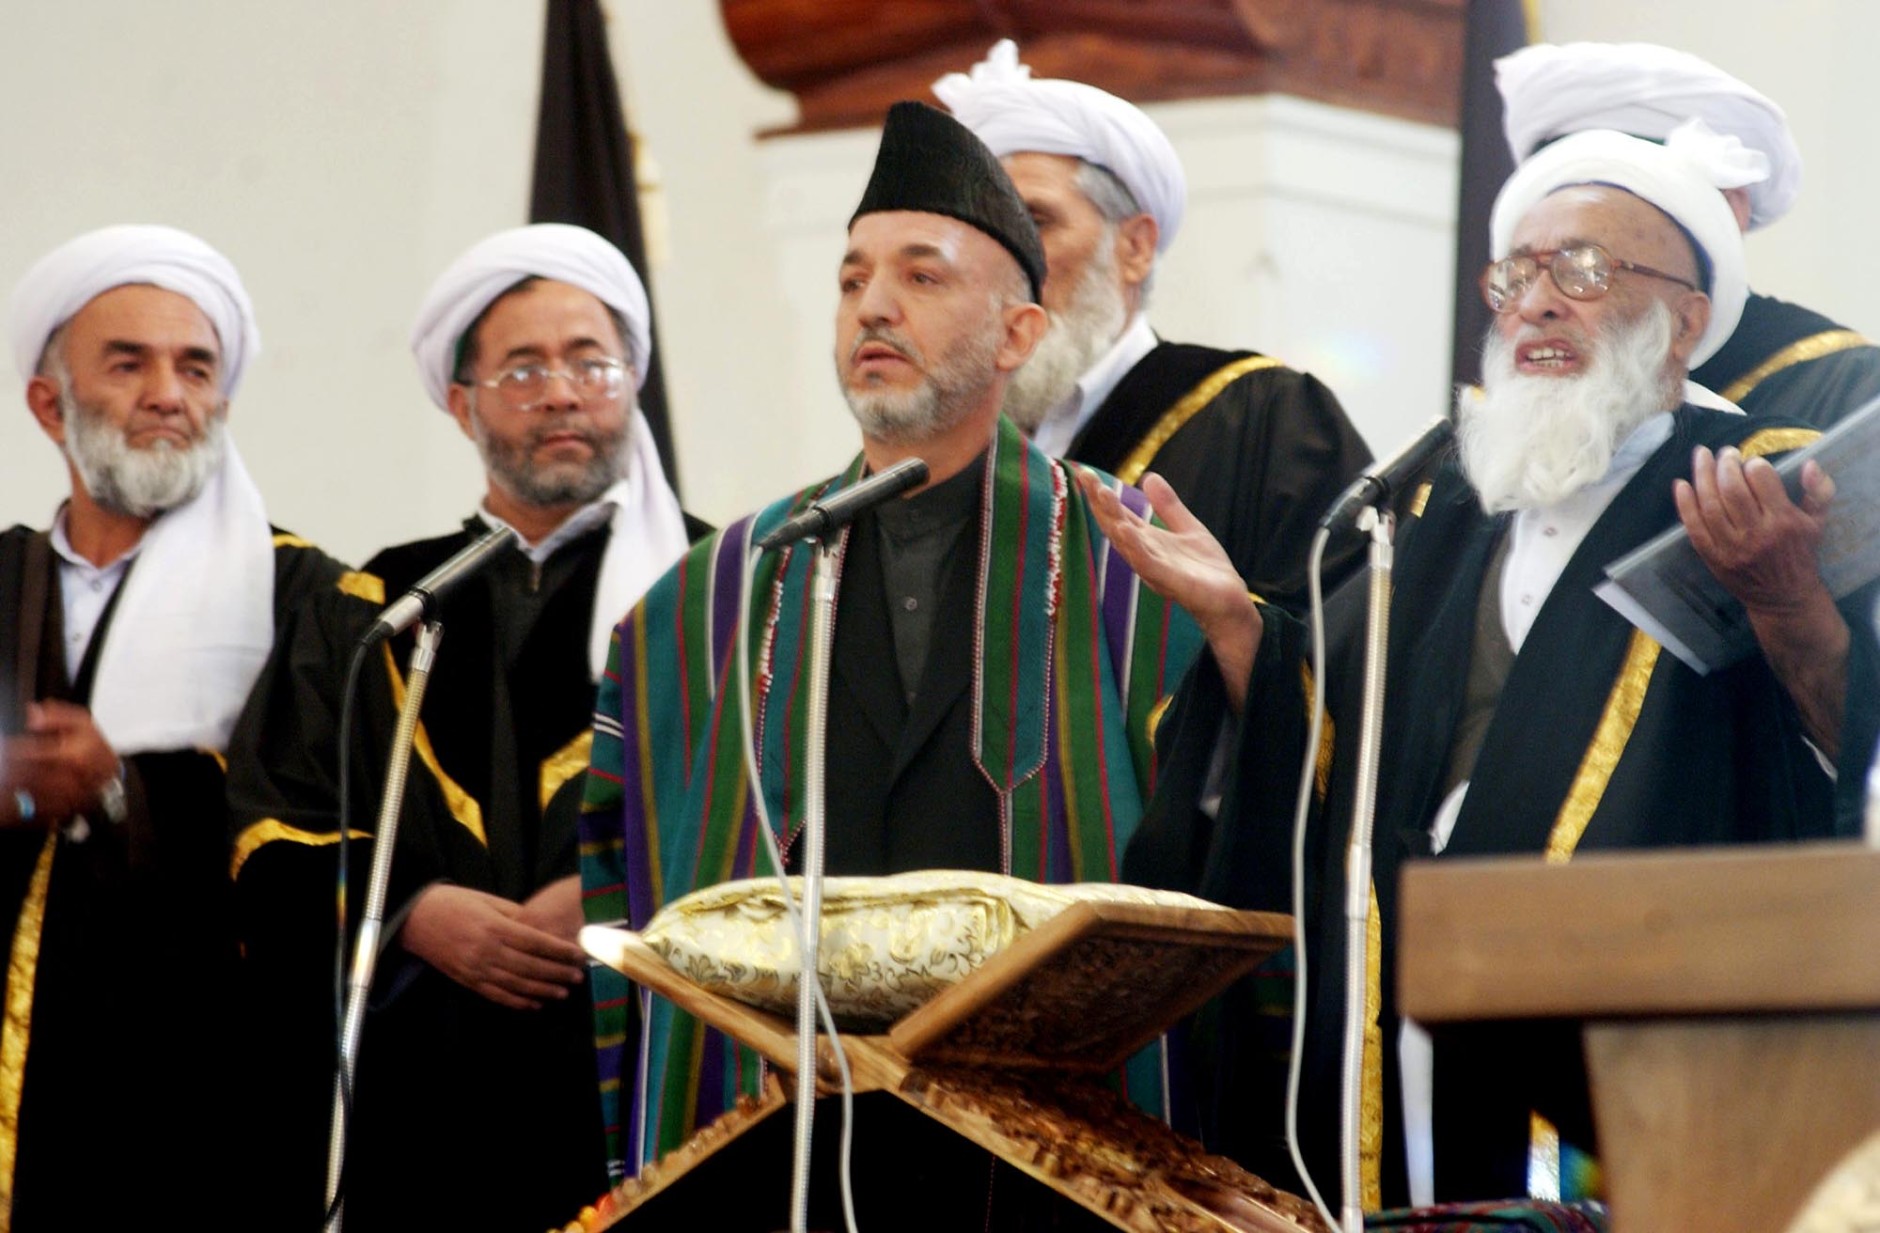 Afghan President Hamid Karzai, center, stands next to Chief Justice Fazl Hadi Shinwari, right, as he takes the oath of office during a ceremony at the Presidential Palace in Kabul Tuesday, Dec. 7, 2004. Karzai was sworn in Tuesday as Afghanistan's first popularly elected president, calling for sustained help from the international community to bolster a young democracy that sill faces the twin threats of terrorism and drugs. (AP Photo/SHAH Marai, POOL)